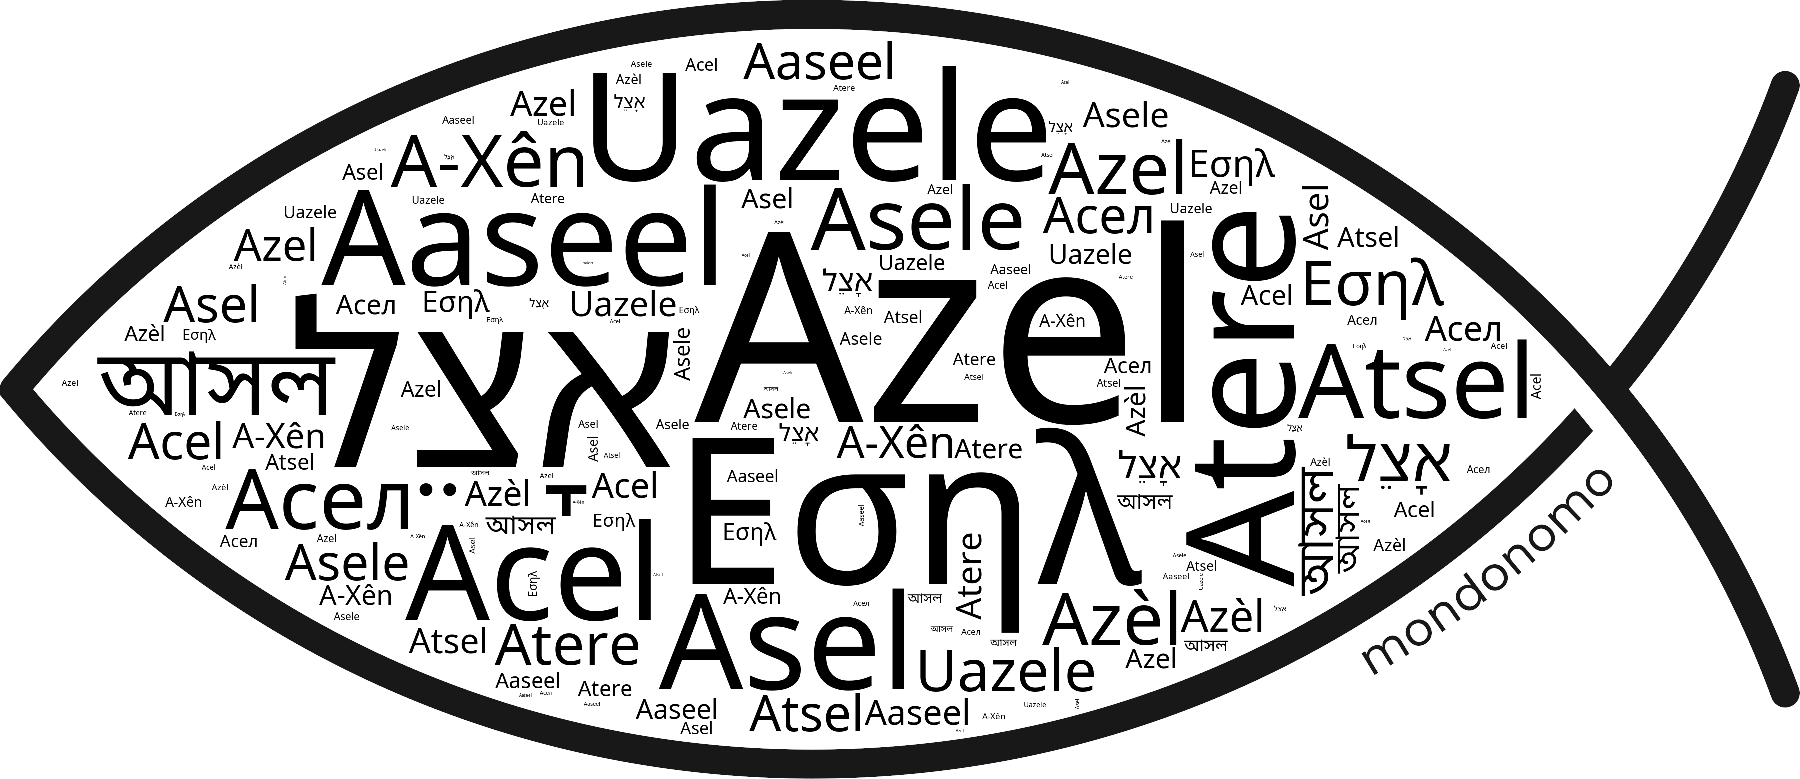 Name Azel in the world's Bibles